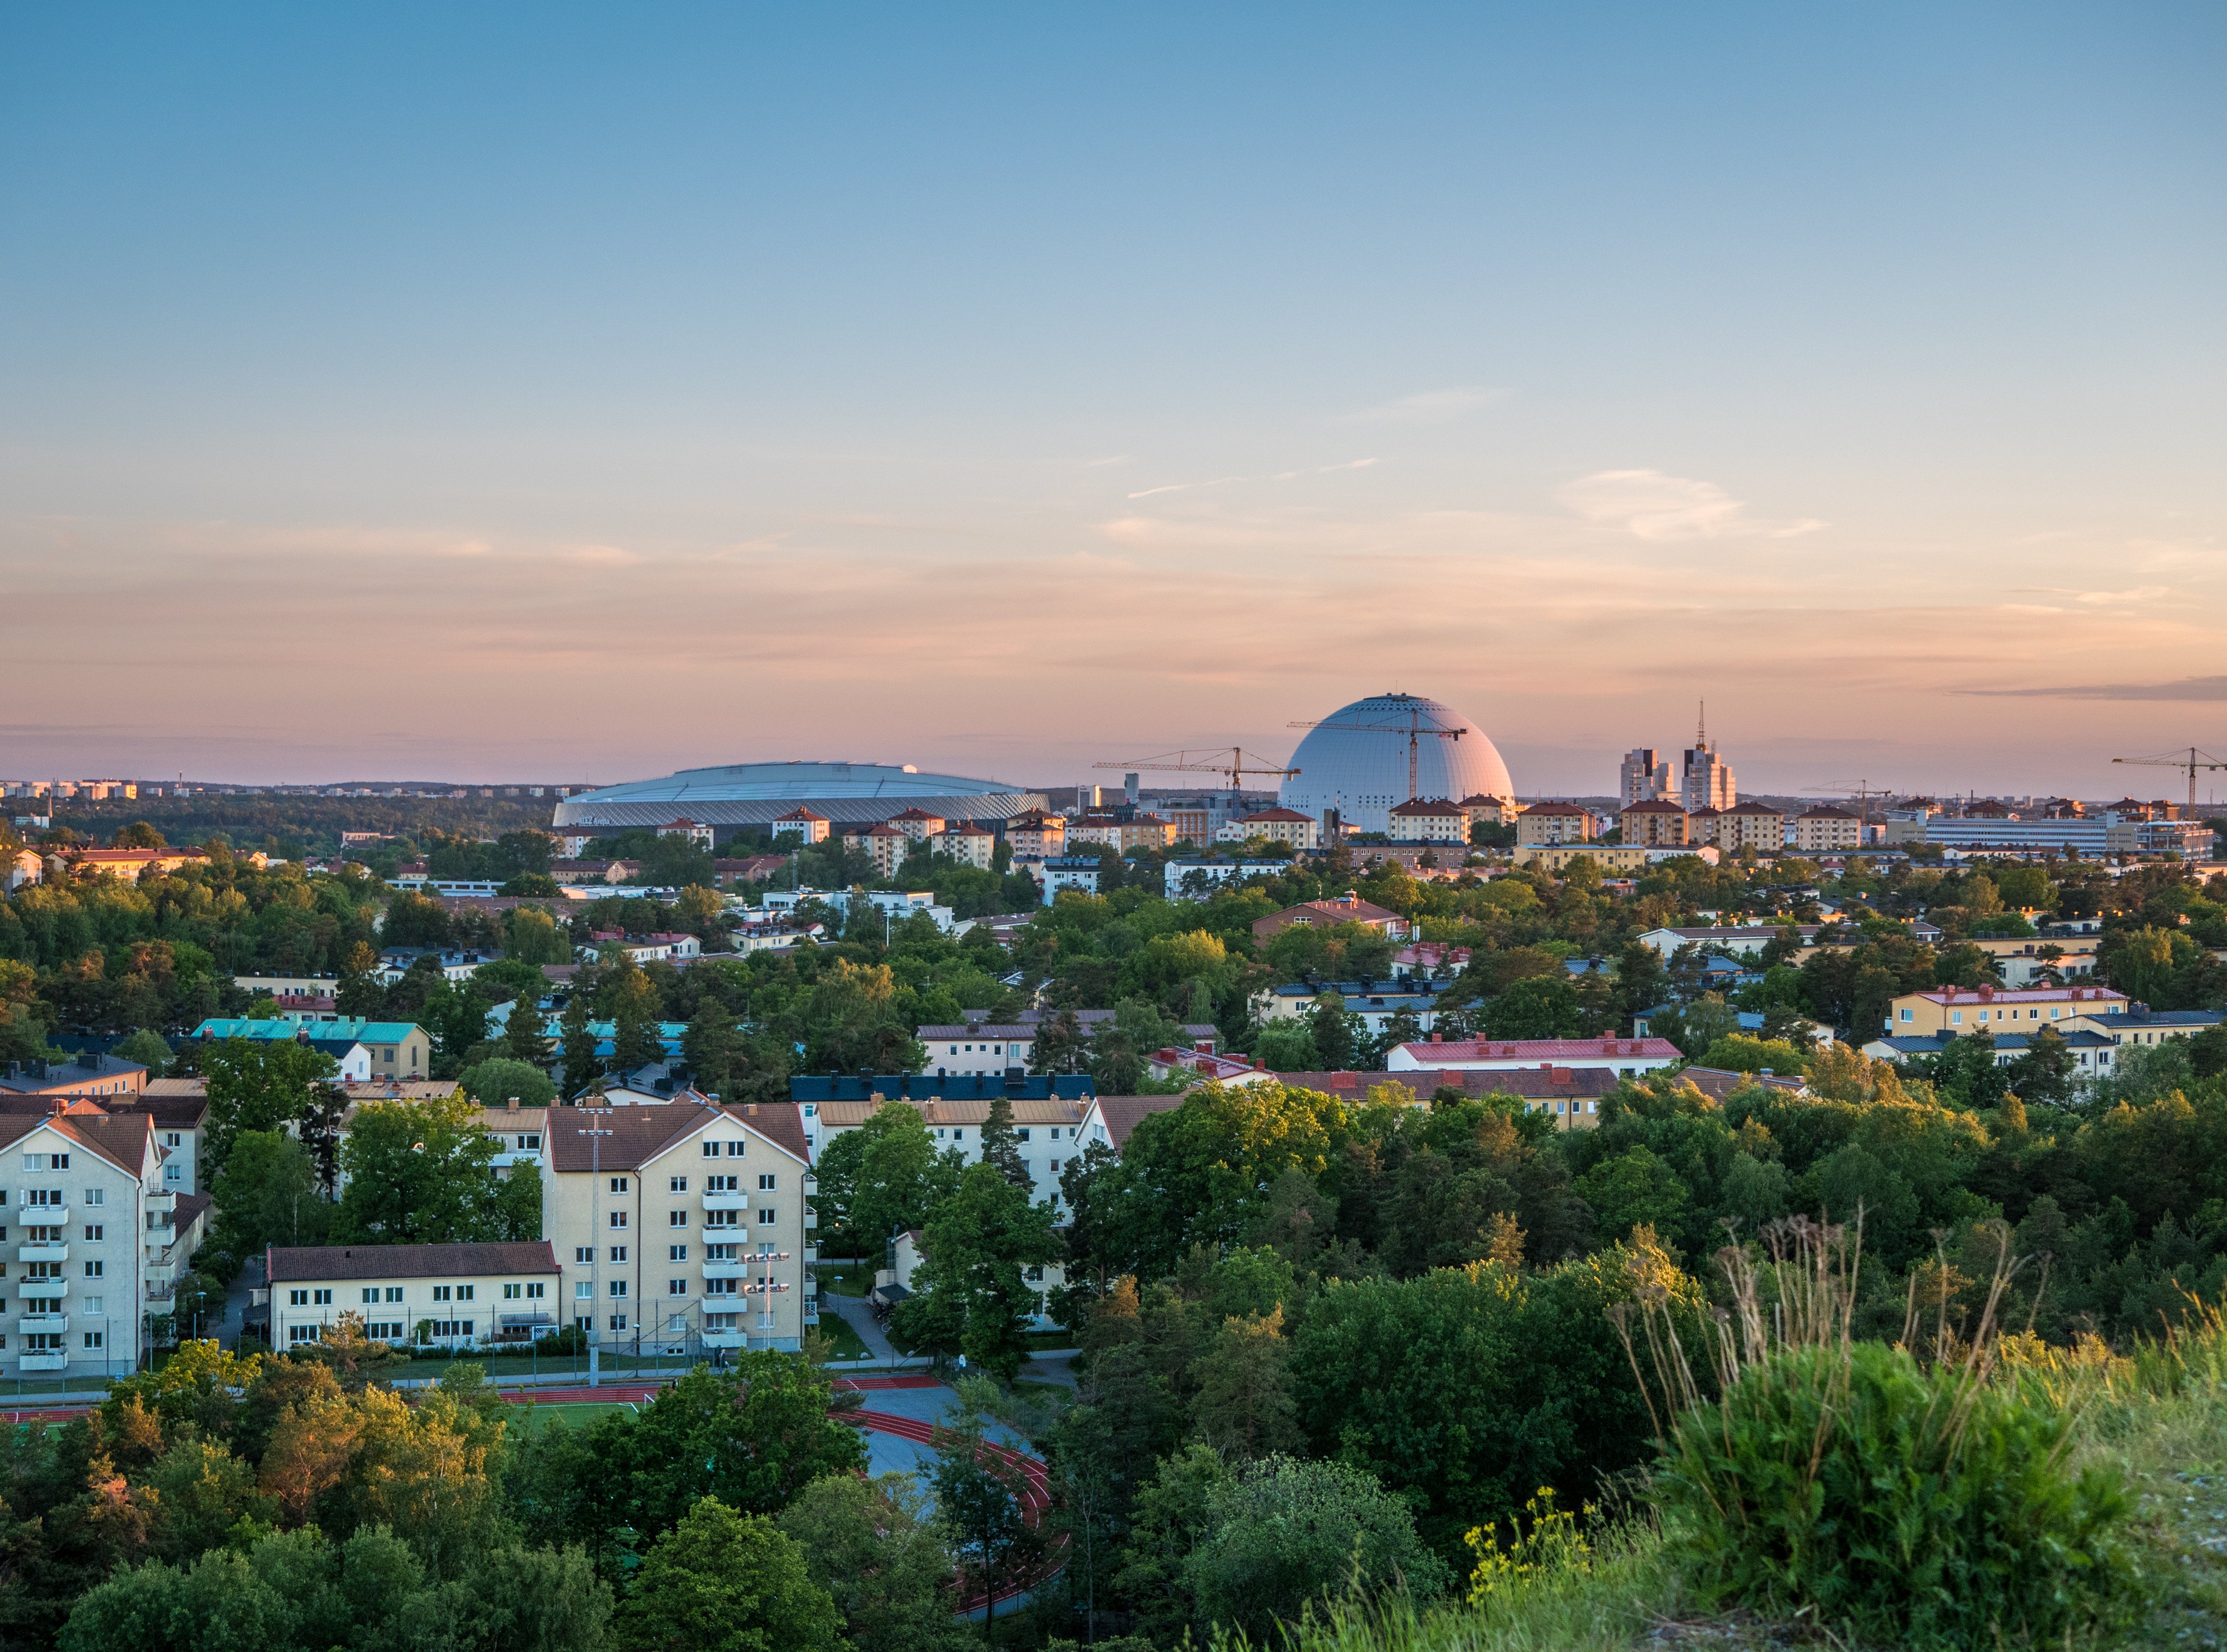 Panoramic view of Globen and Nya Söderstadion in south of Stockholm.